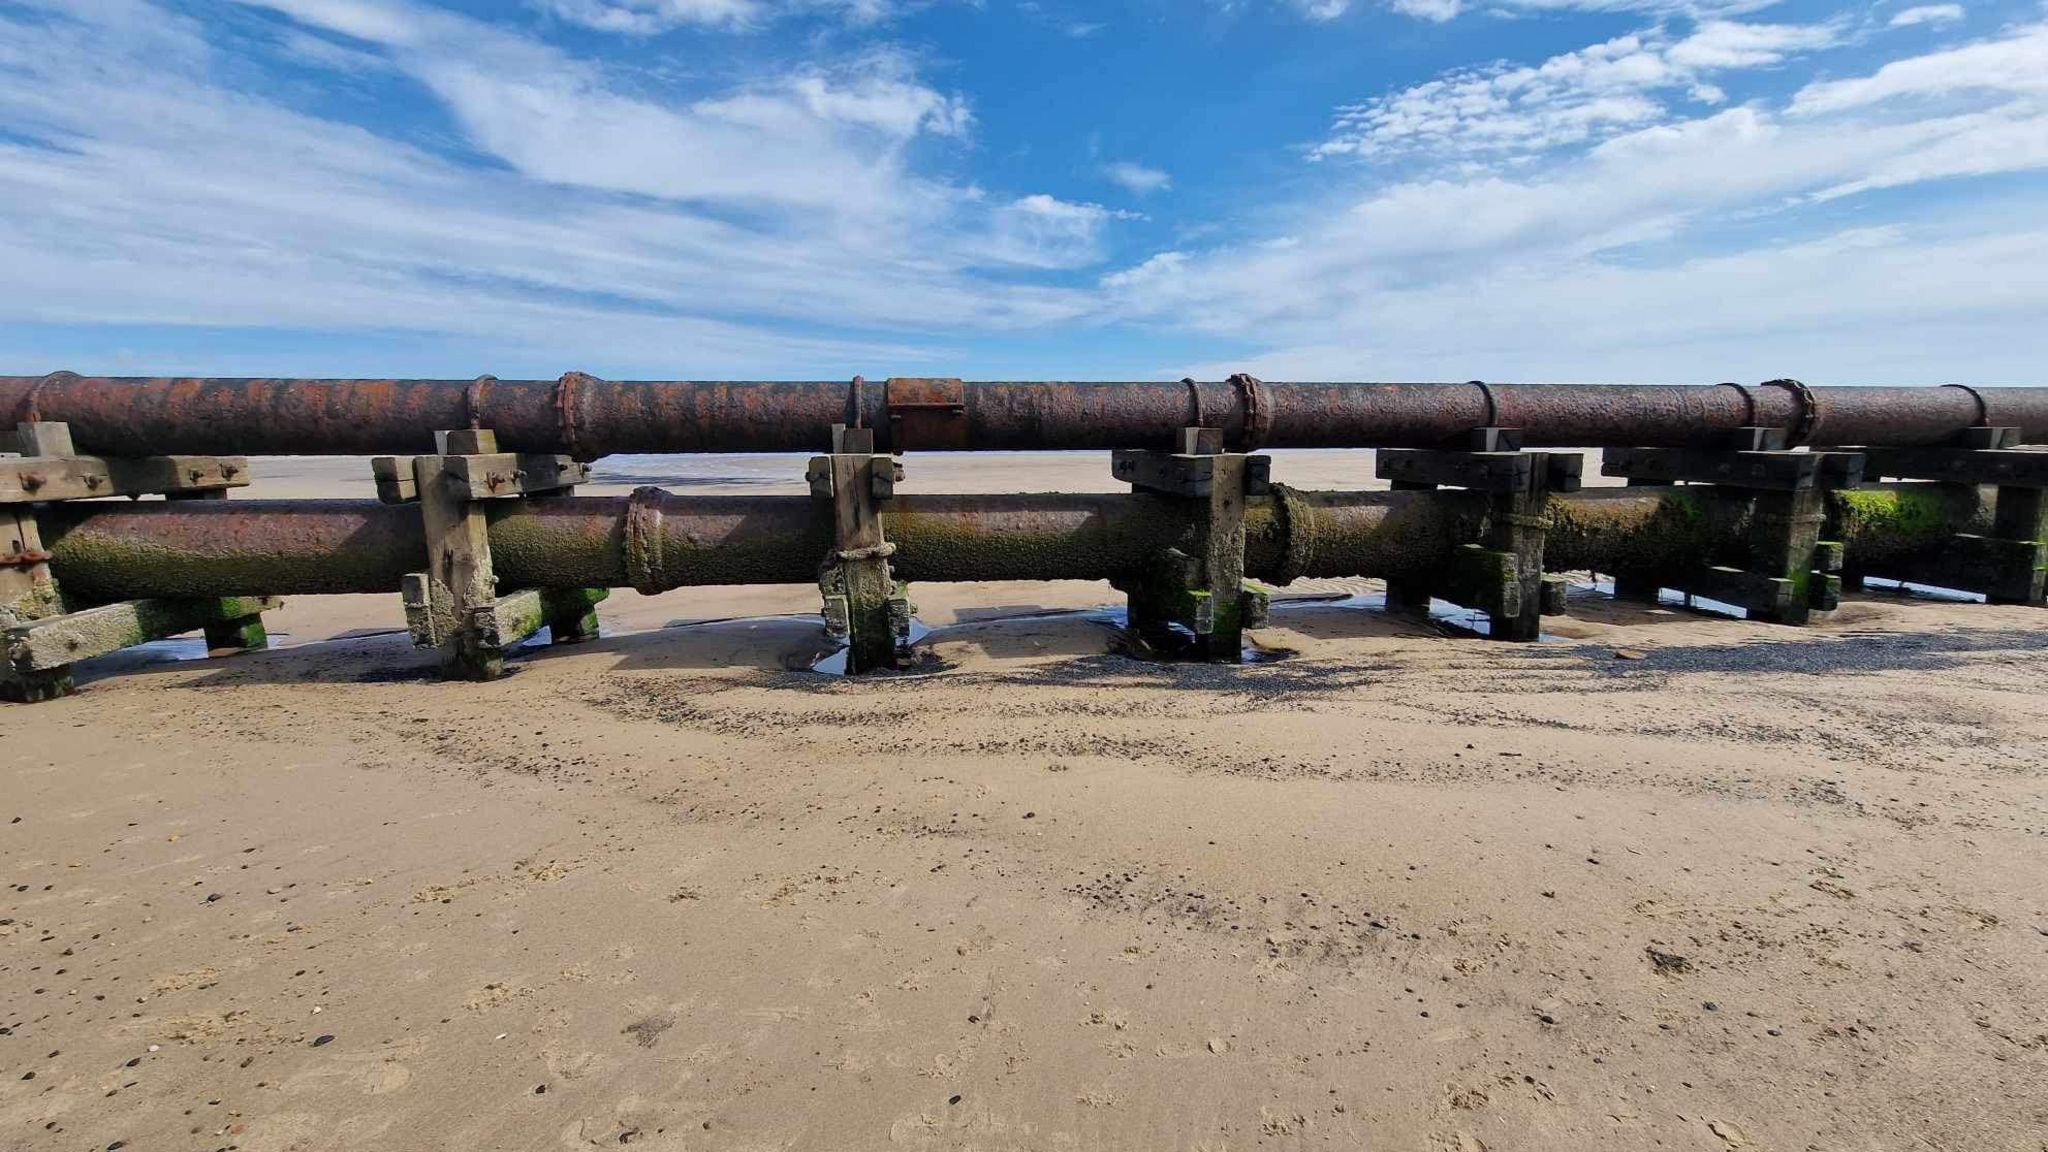 A big pipe stretching out across the beach  